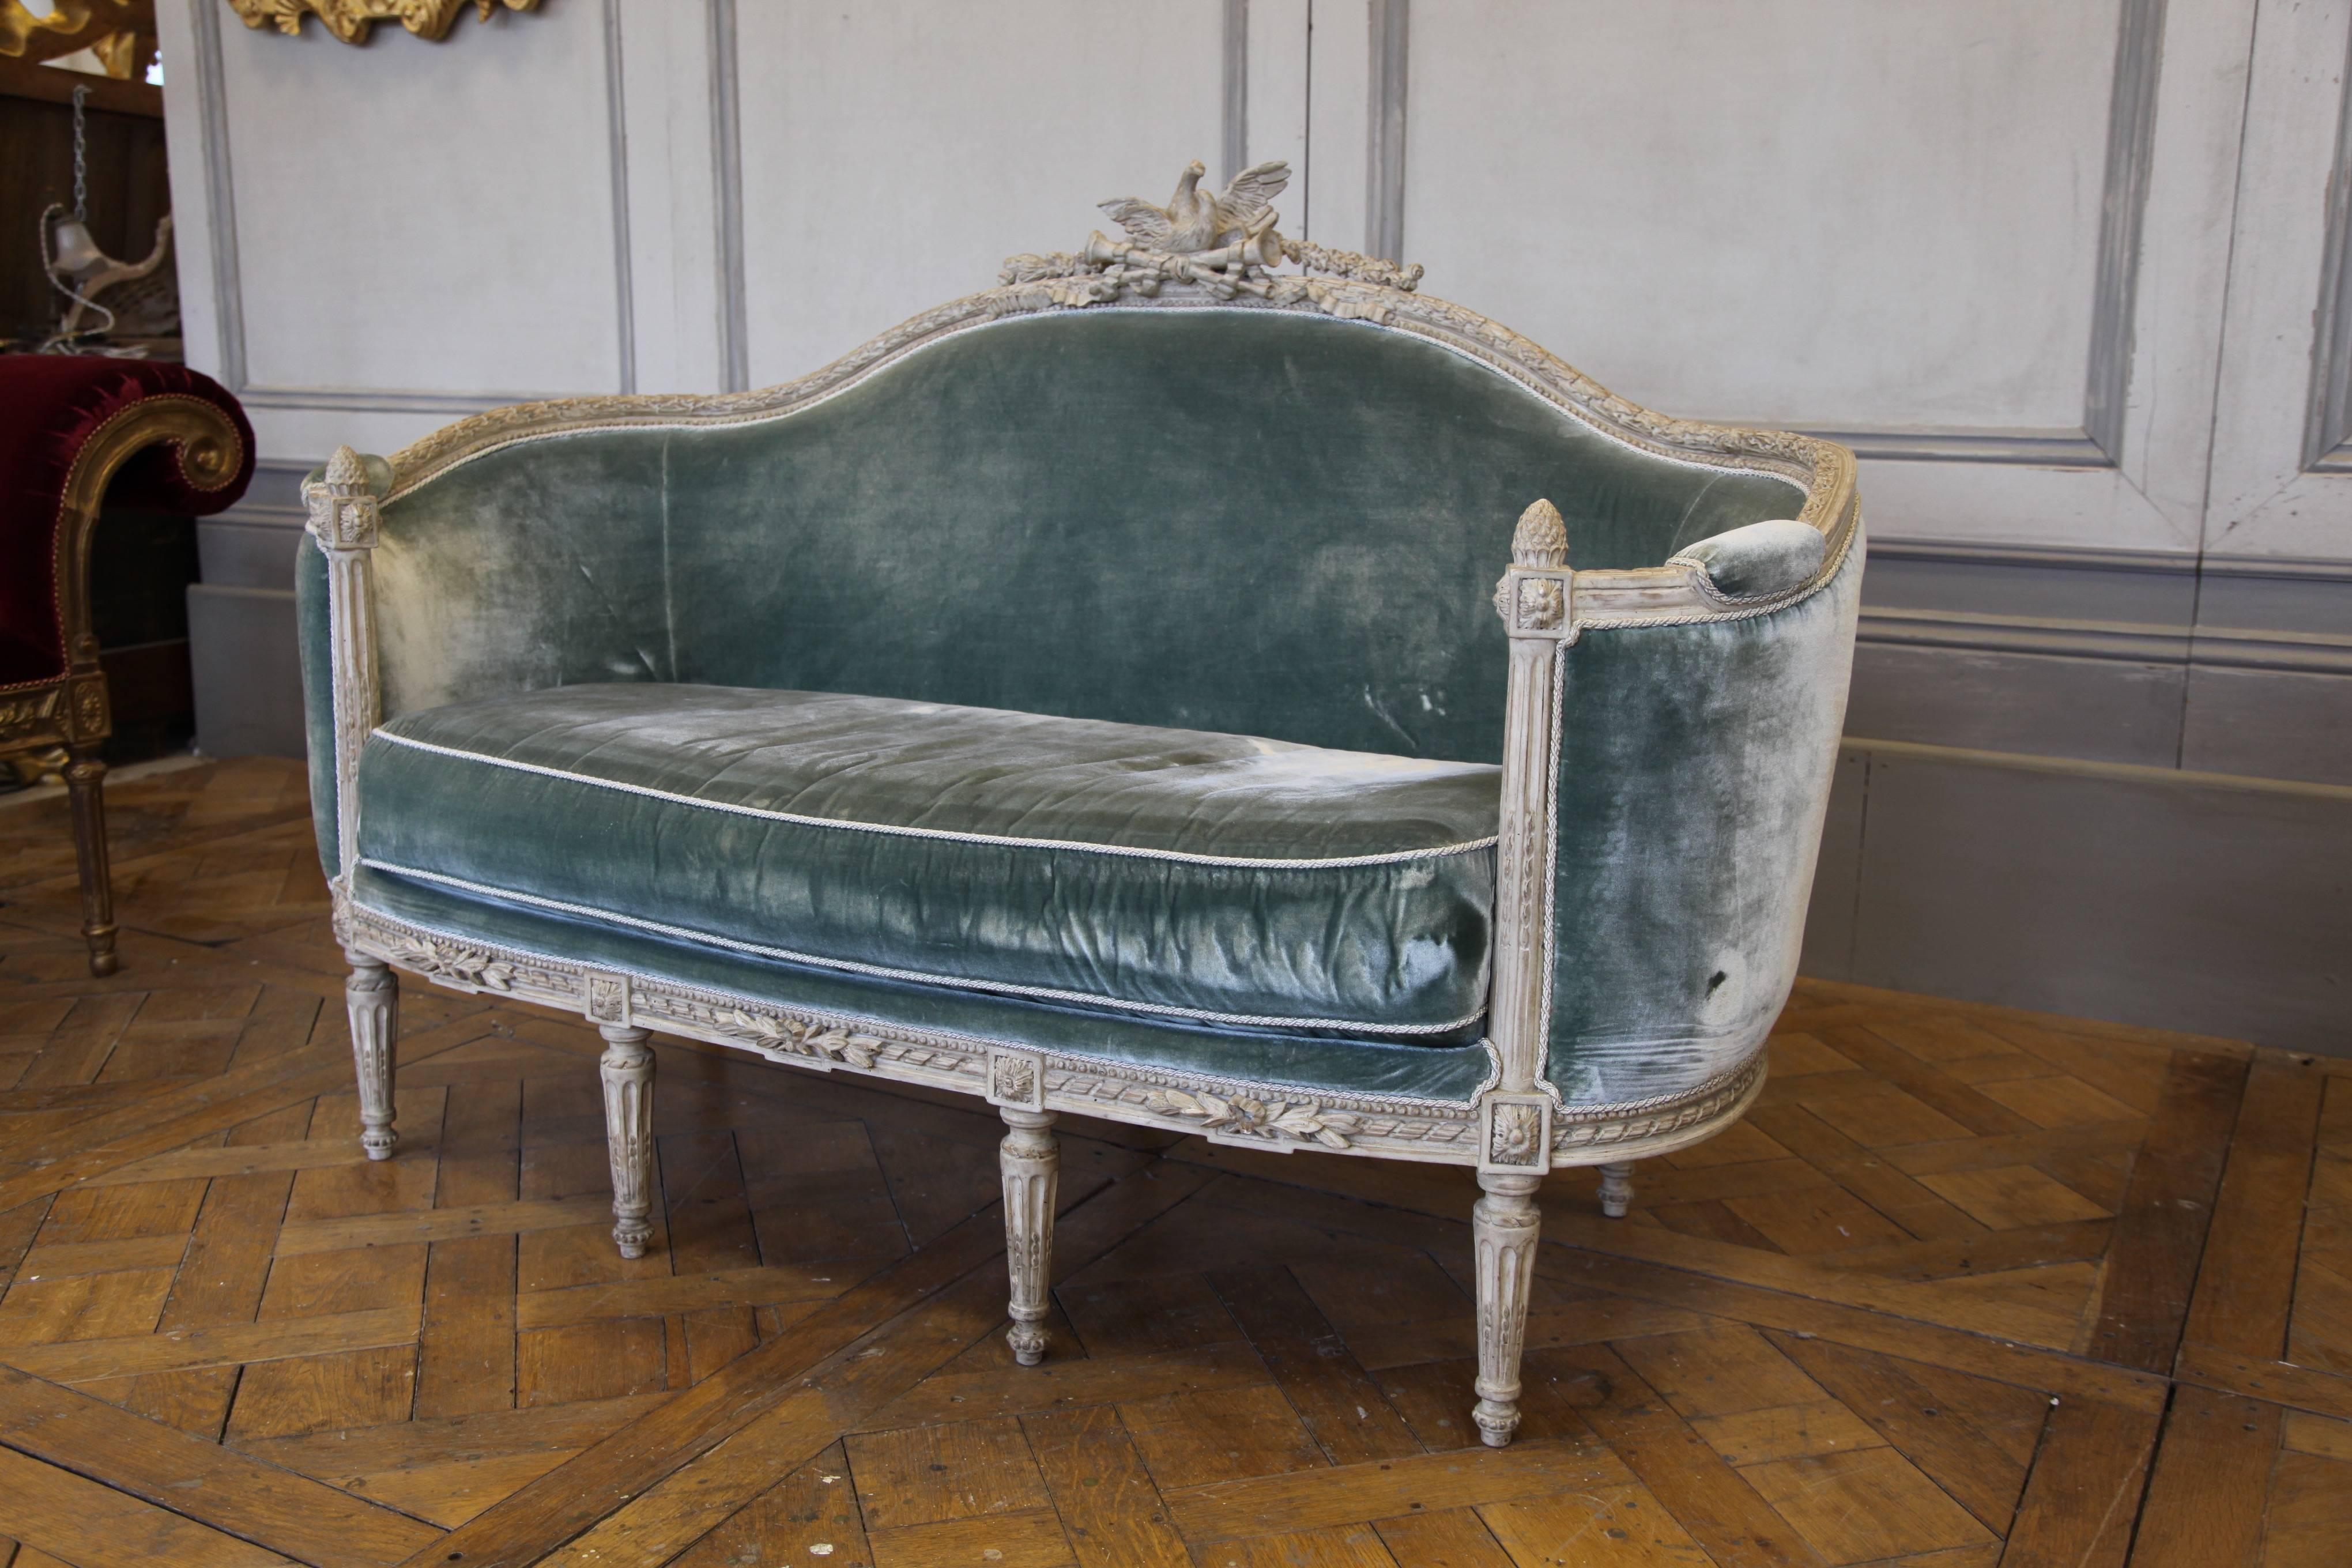 Louis XVI style Corbeille sofa: Hand-carved by master craftsmen and hand finished in a lightly aged and distressed, gesso, cerused patina made using traditional methods and materials. Upholstered in blue-grey silk velvet as seen in the picture.
   